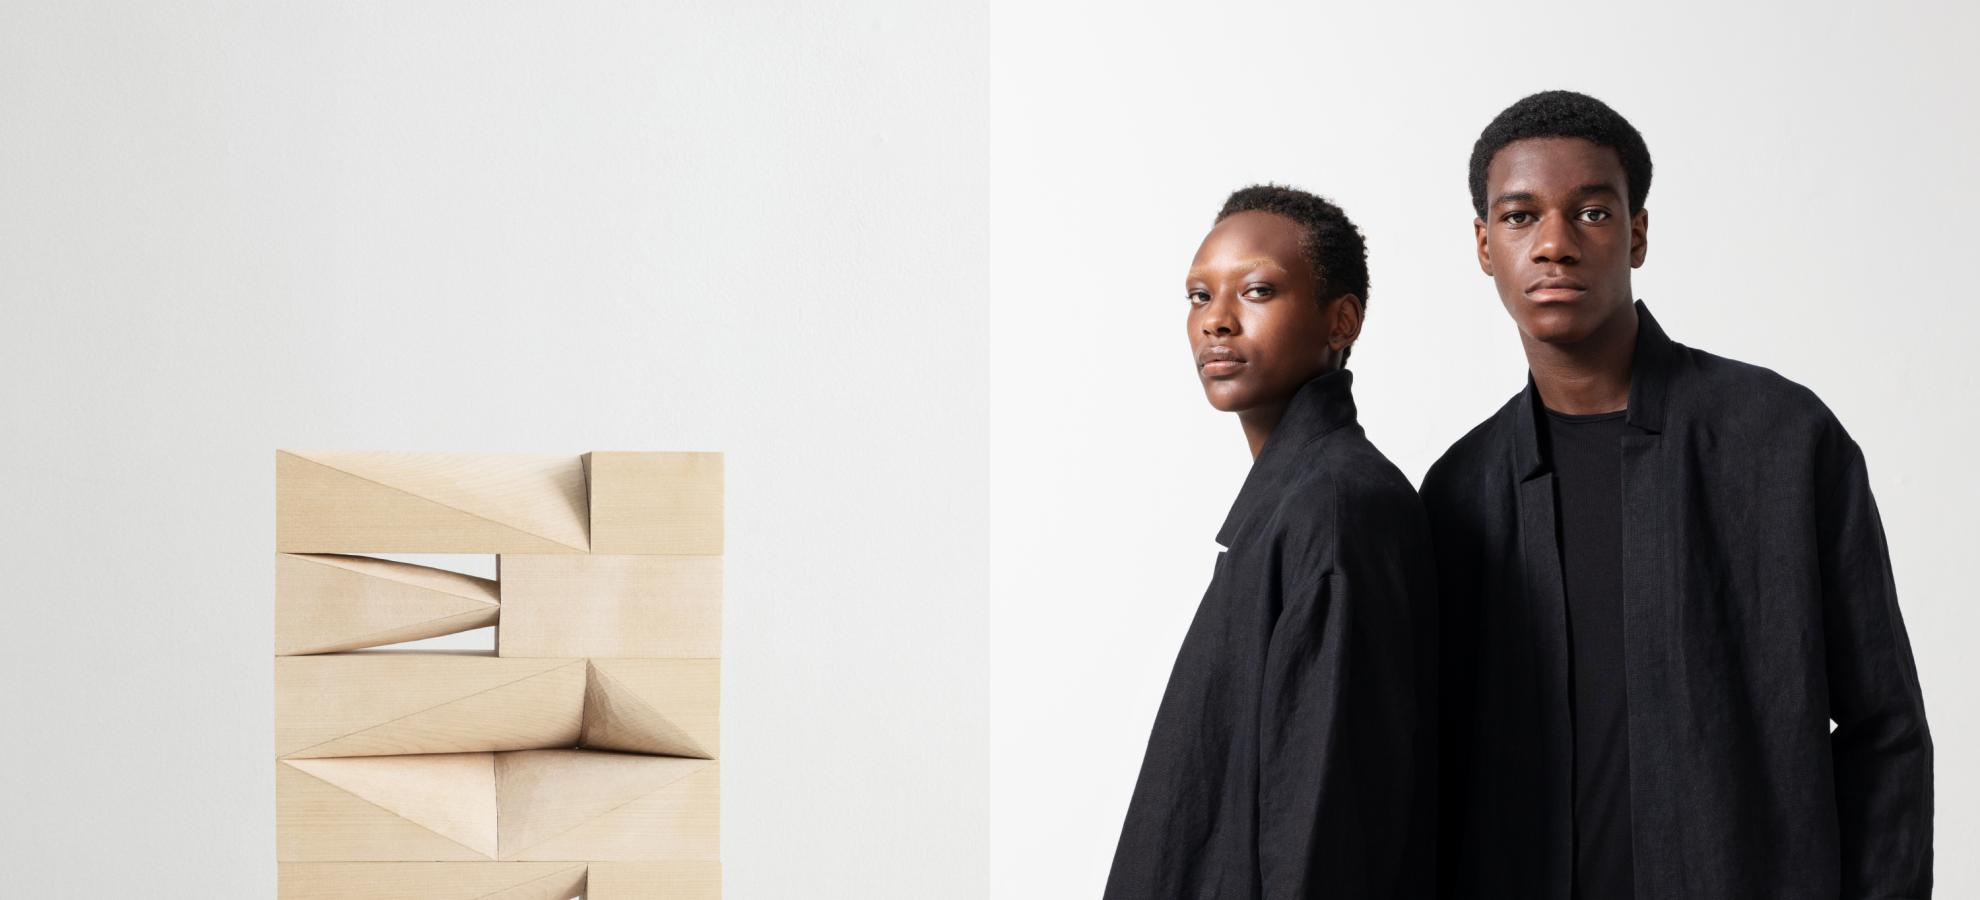 Two photos merged into one. On the left is a modern art sculpture standing on a white plinth in a gallery. On the right are two models dressed in long black clothes against a white background.